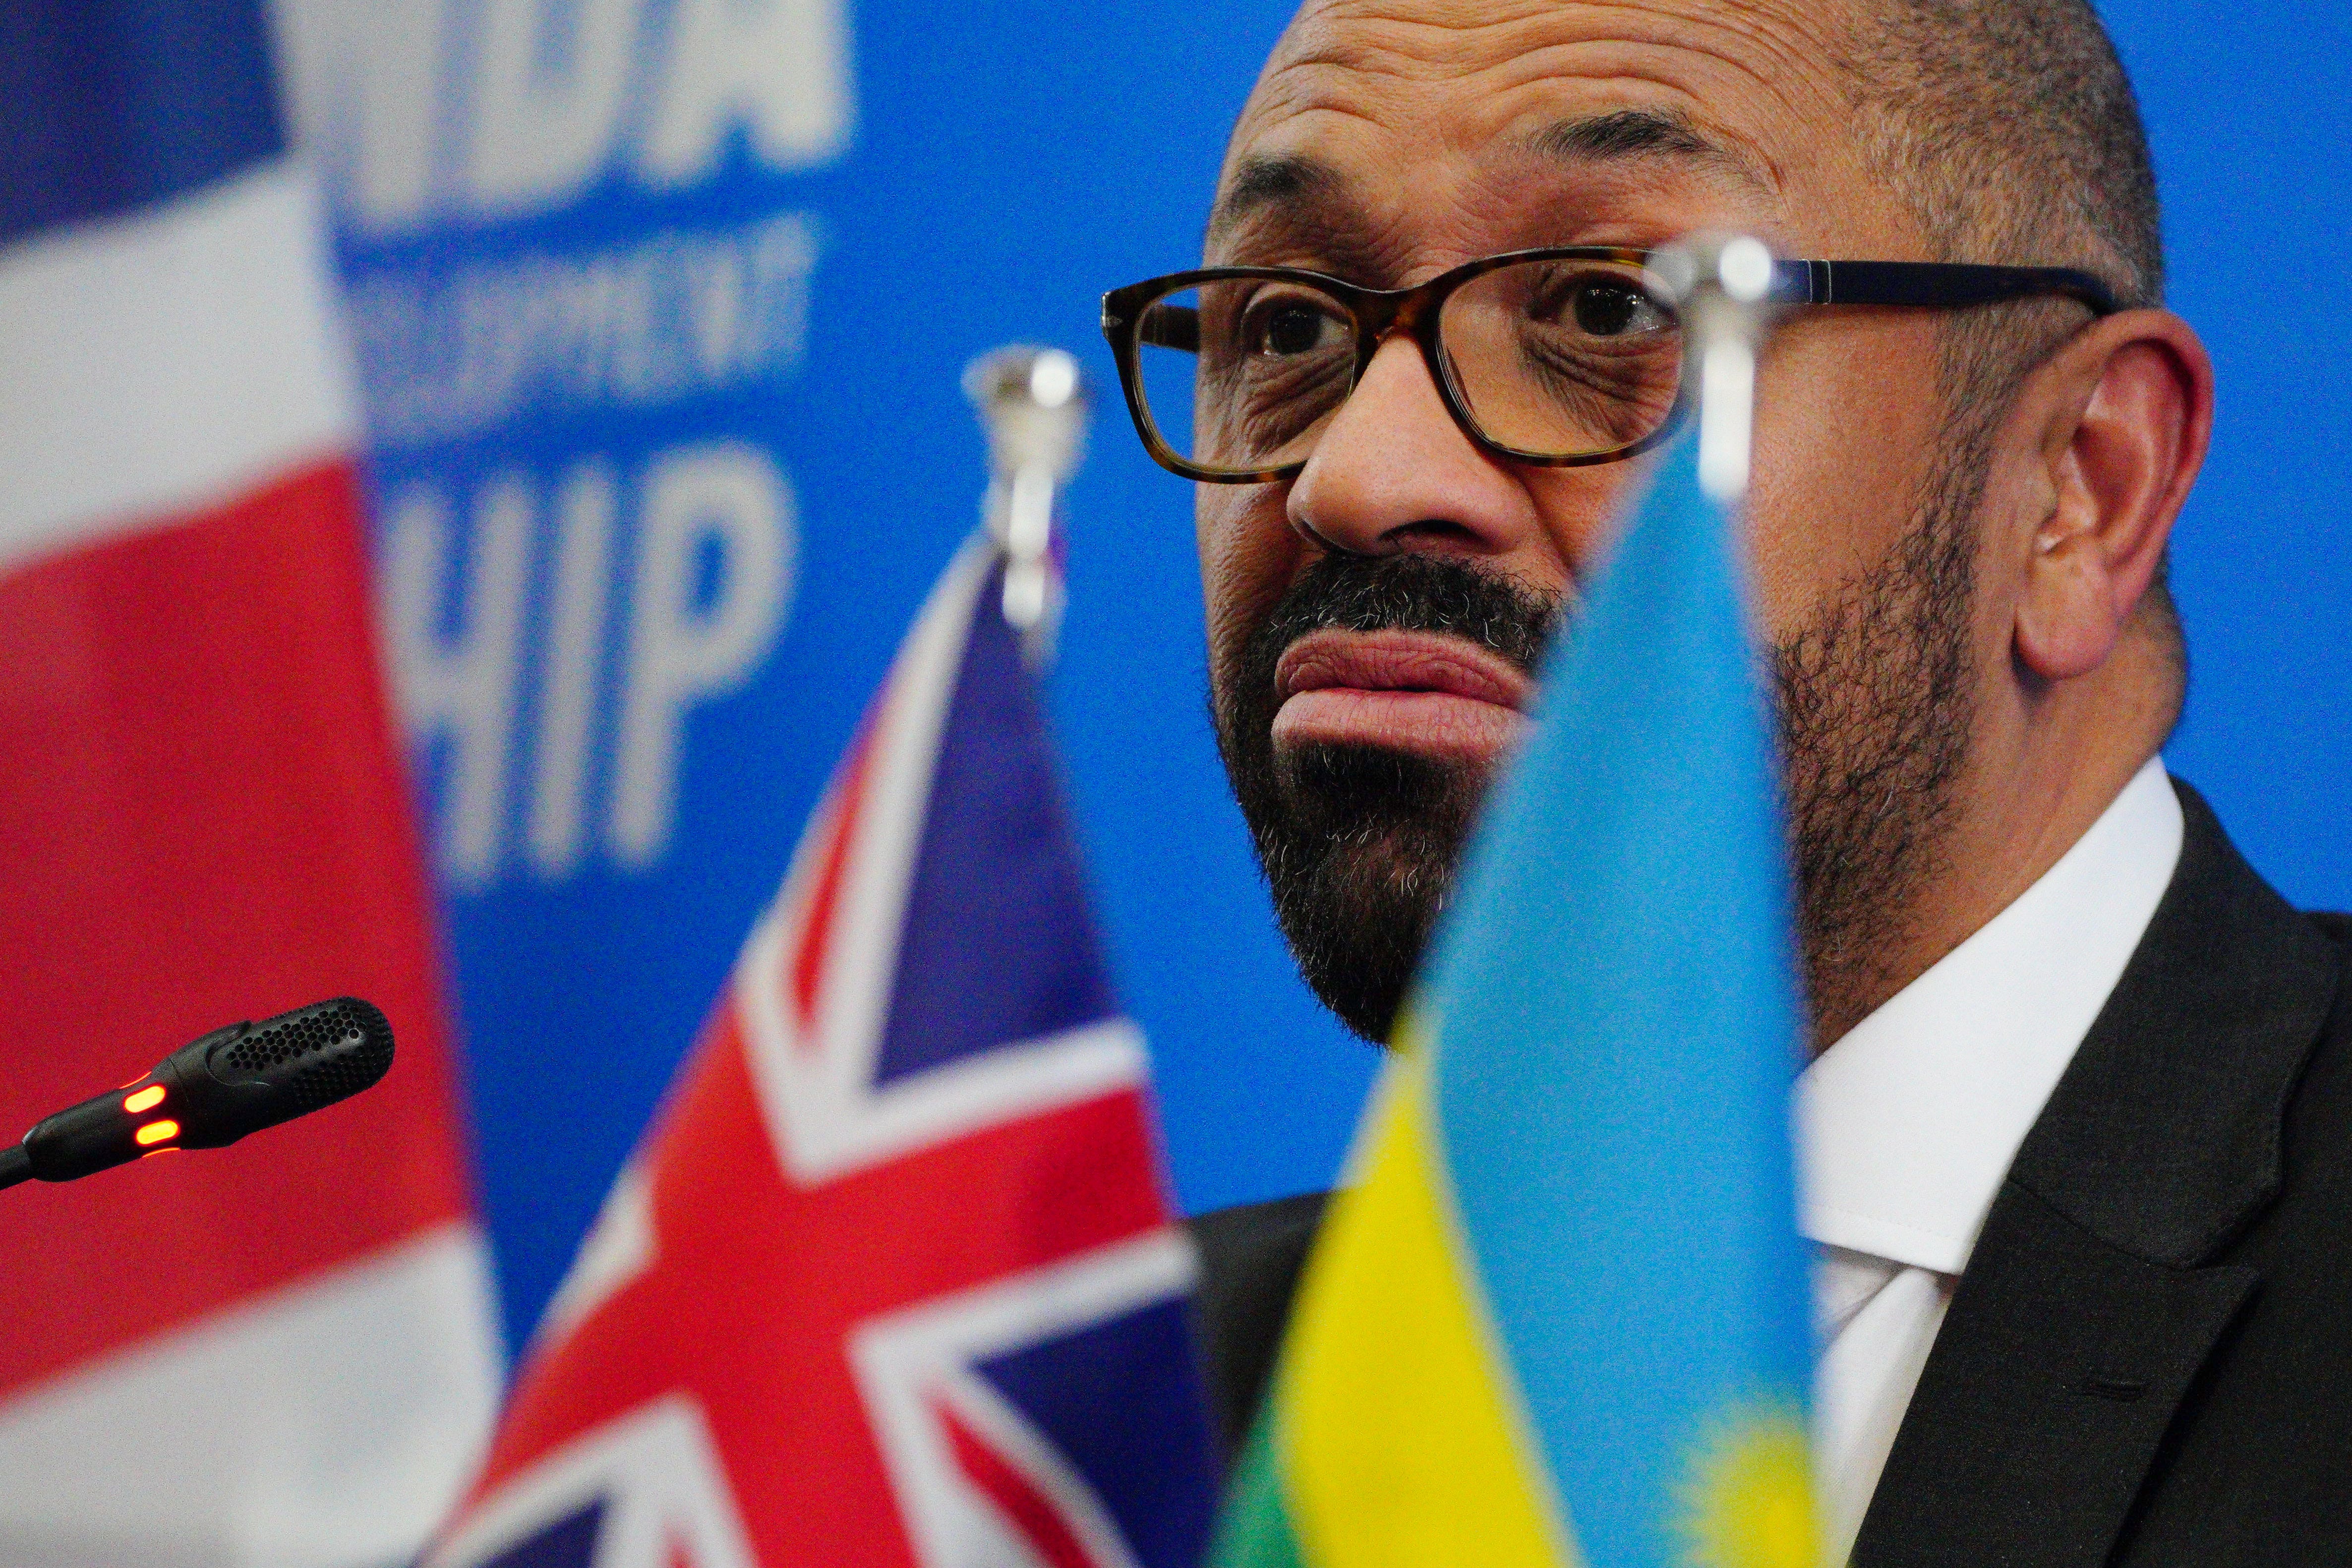 James Cleverly during Tuesday’s press conference in Kigali